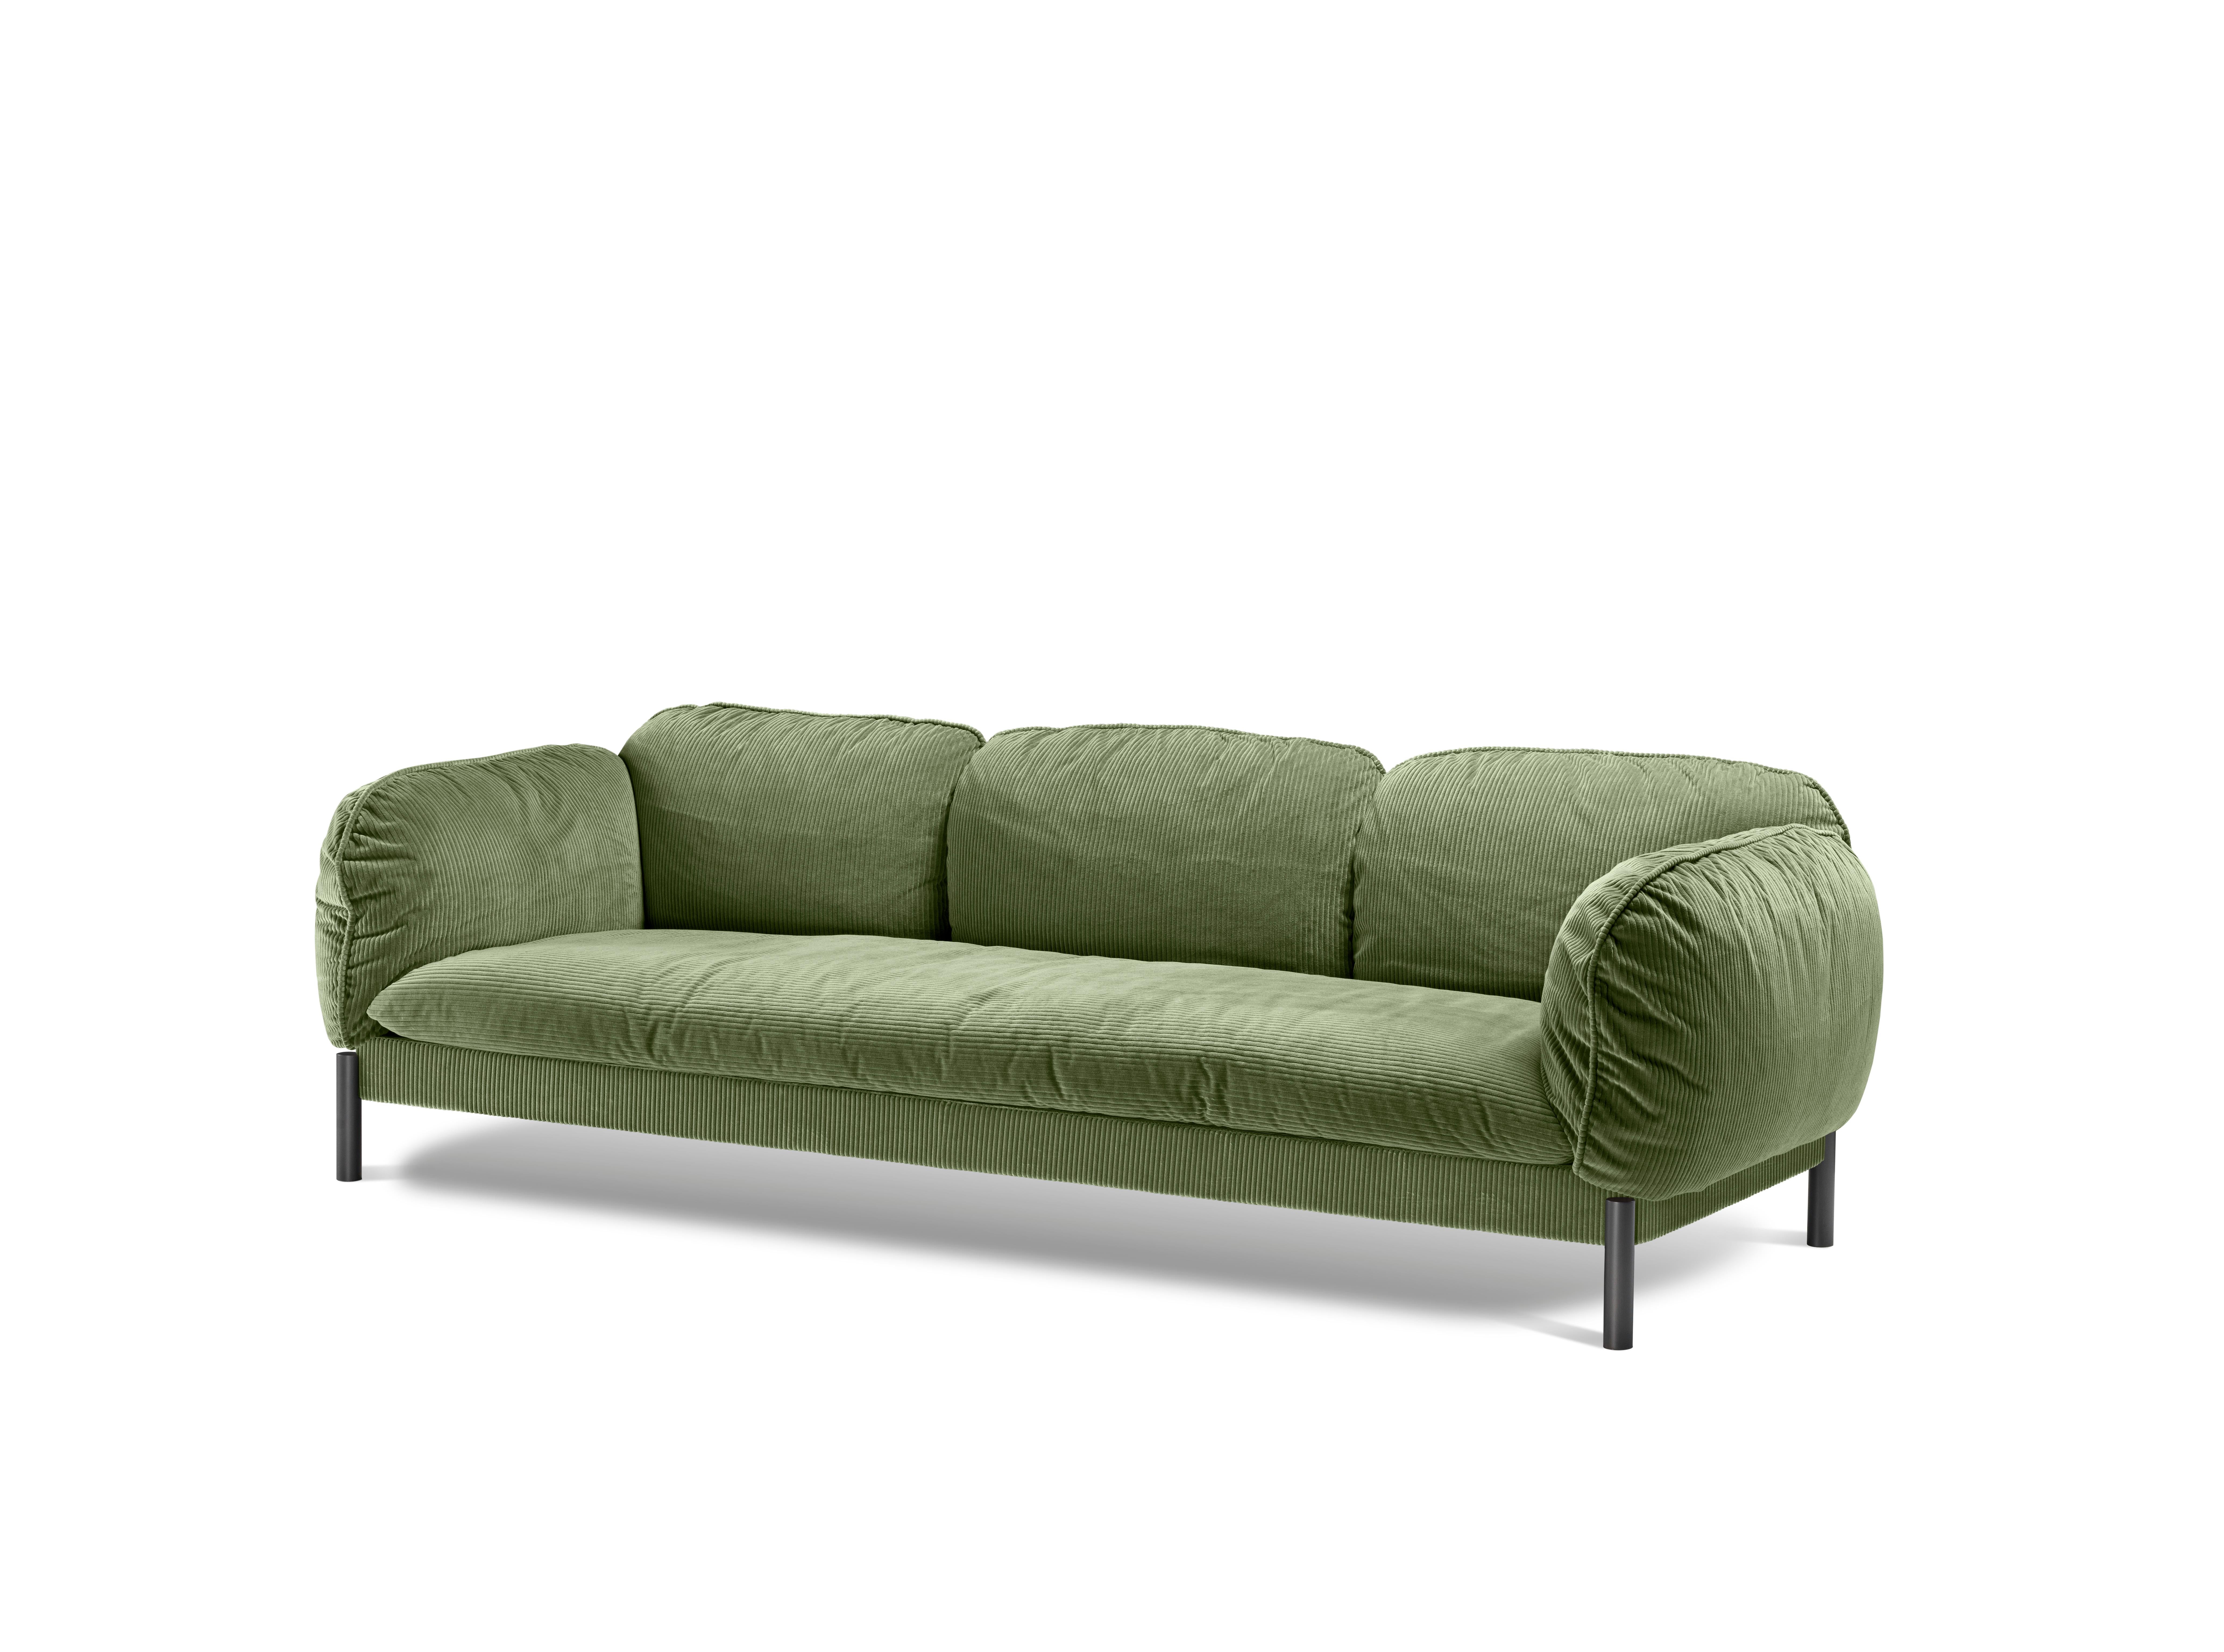 Soft and welcoming, this sofa is inspired by the 70’s; a decade that changed our culture forever through freedom and self-discovery. The Sofa invites you to a world of fantasy where you can indulge in the comfort and coziness of your